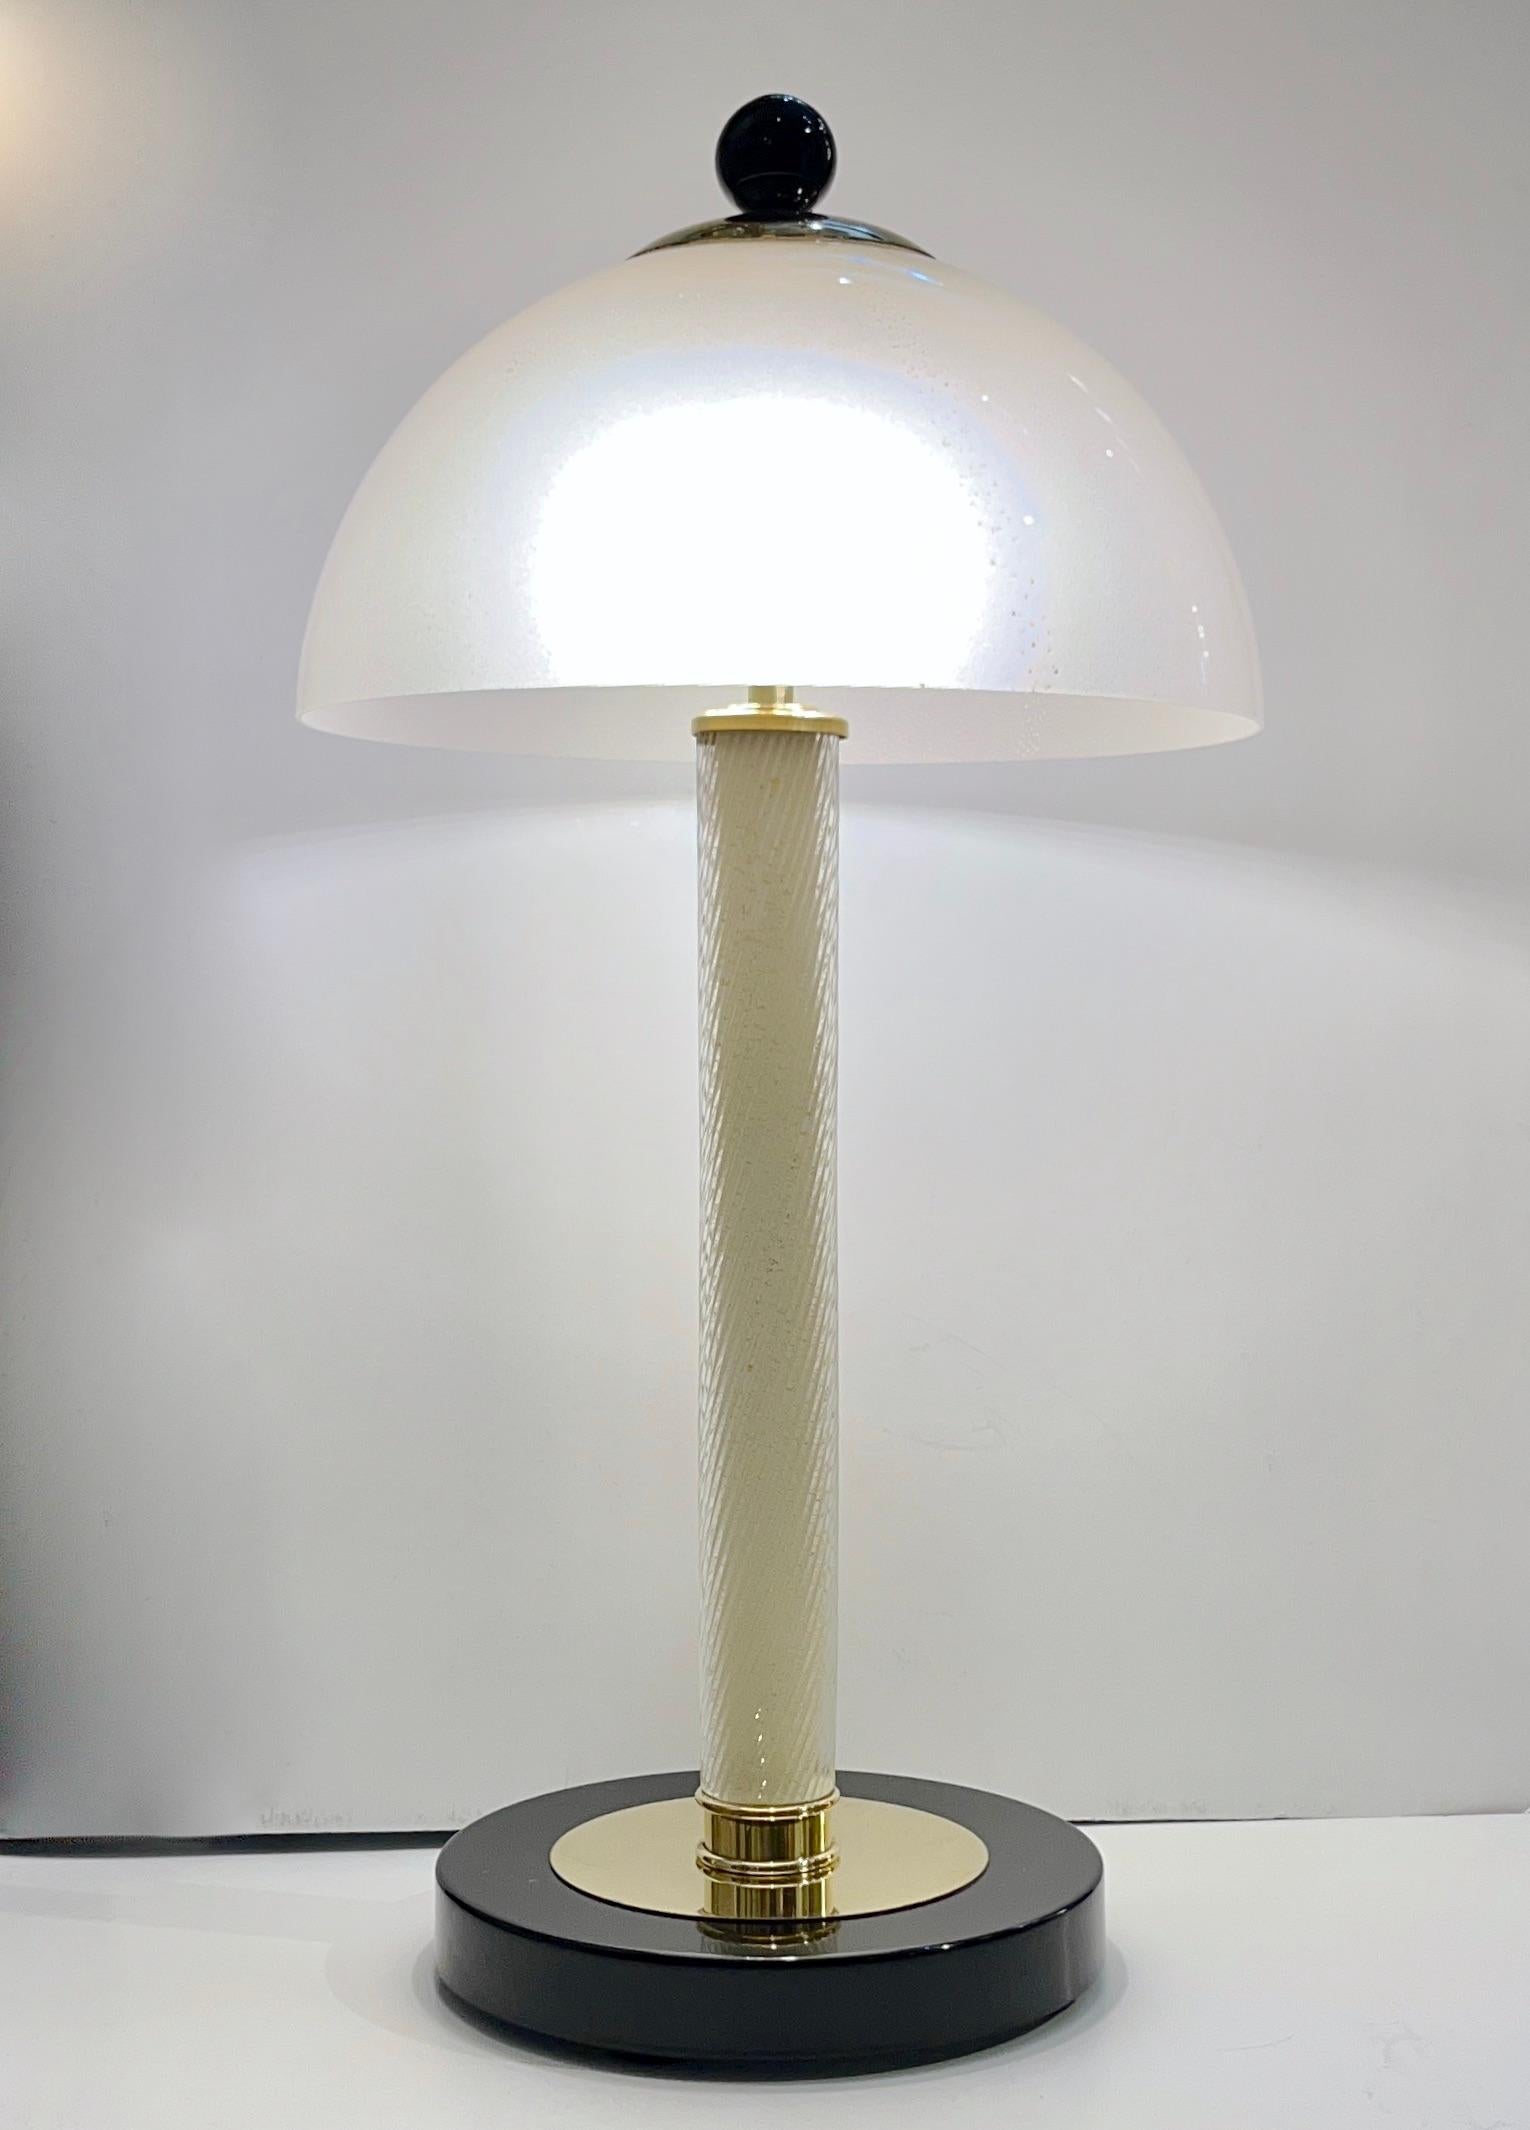 A sophisticated yet minimalist elegant design! This pair of lamps, entirely handcrafted in Italy, with hovering Murano glass domes as top shades, shows high quality of craftsmanship, and great attention to detail: the cupola is made in ivory white